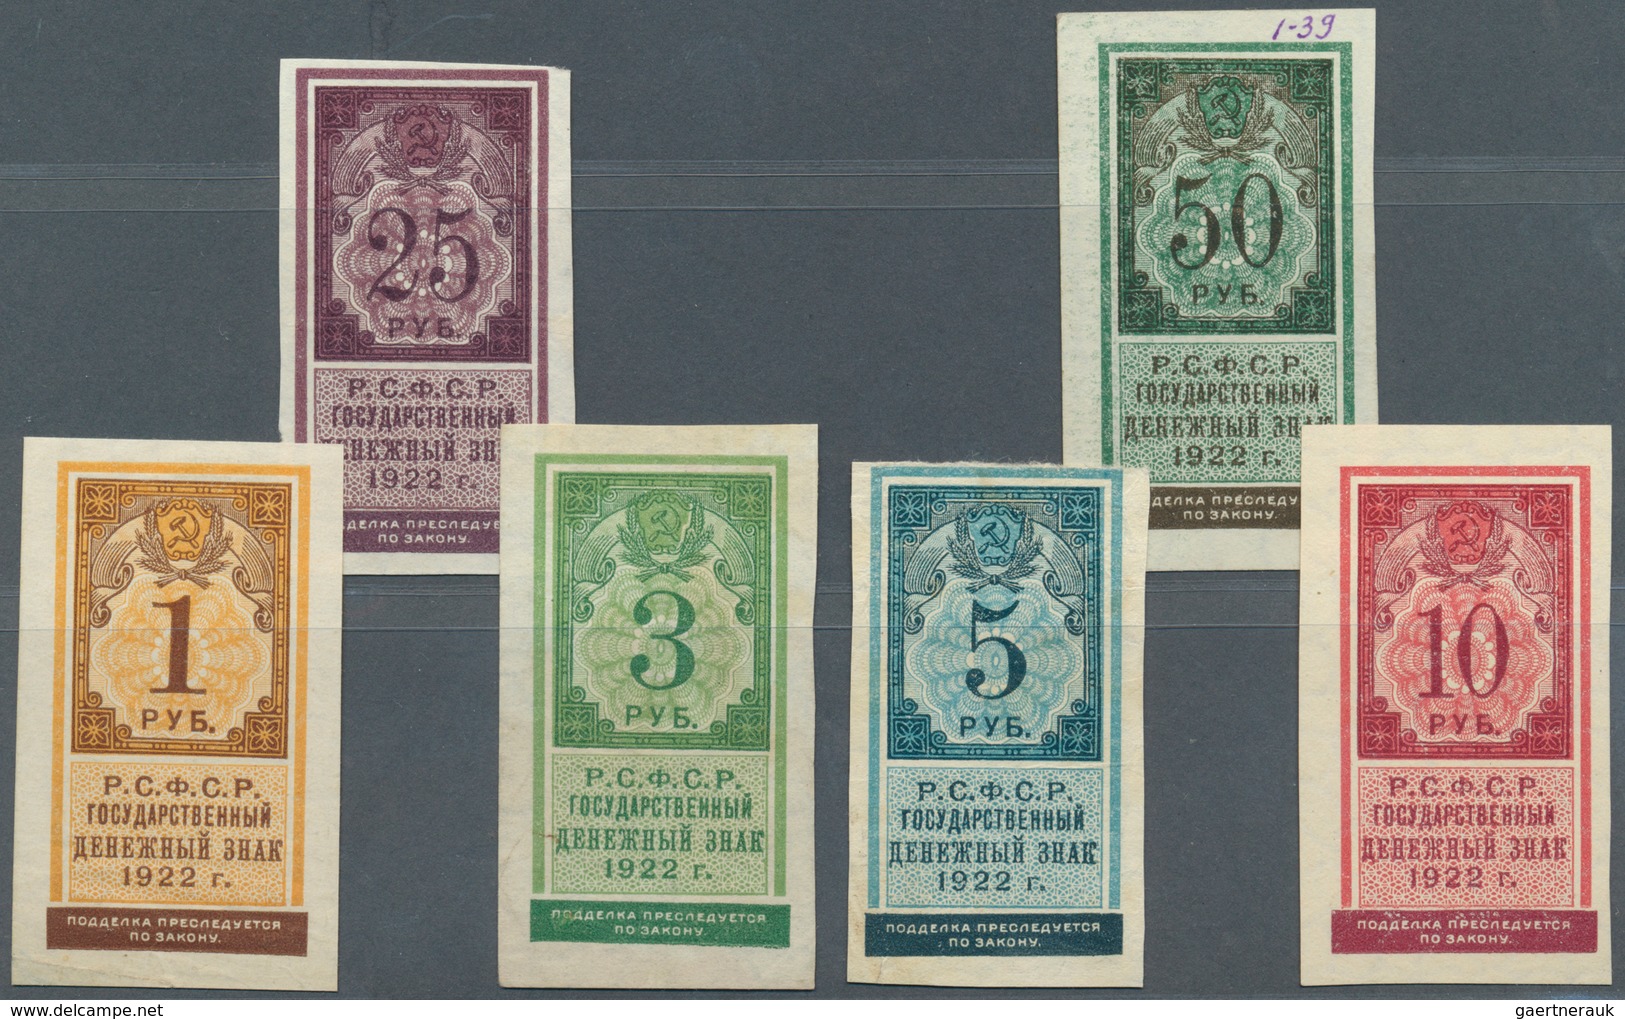 02268 Russia / Russland: Full Set Of The State Currency Notes 1922 Containing 1, 3, 5, 10, 25 And 50 Ruble - Russia